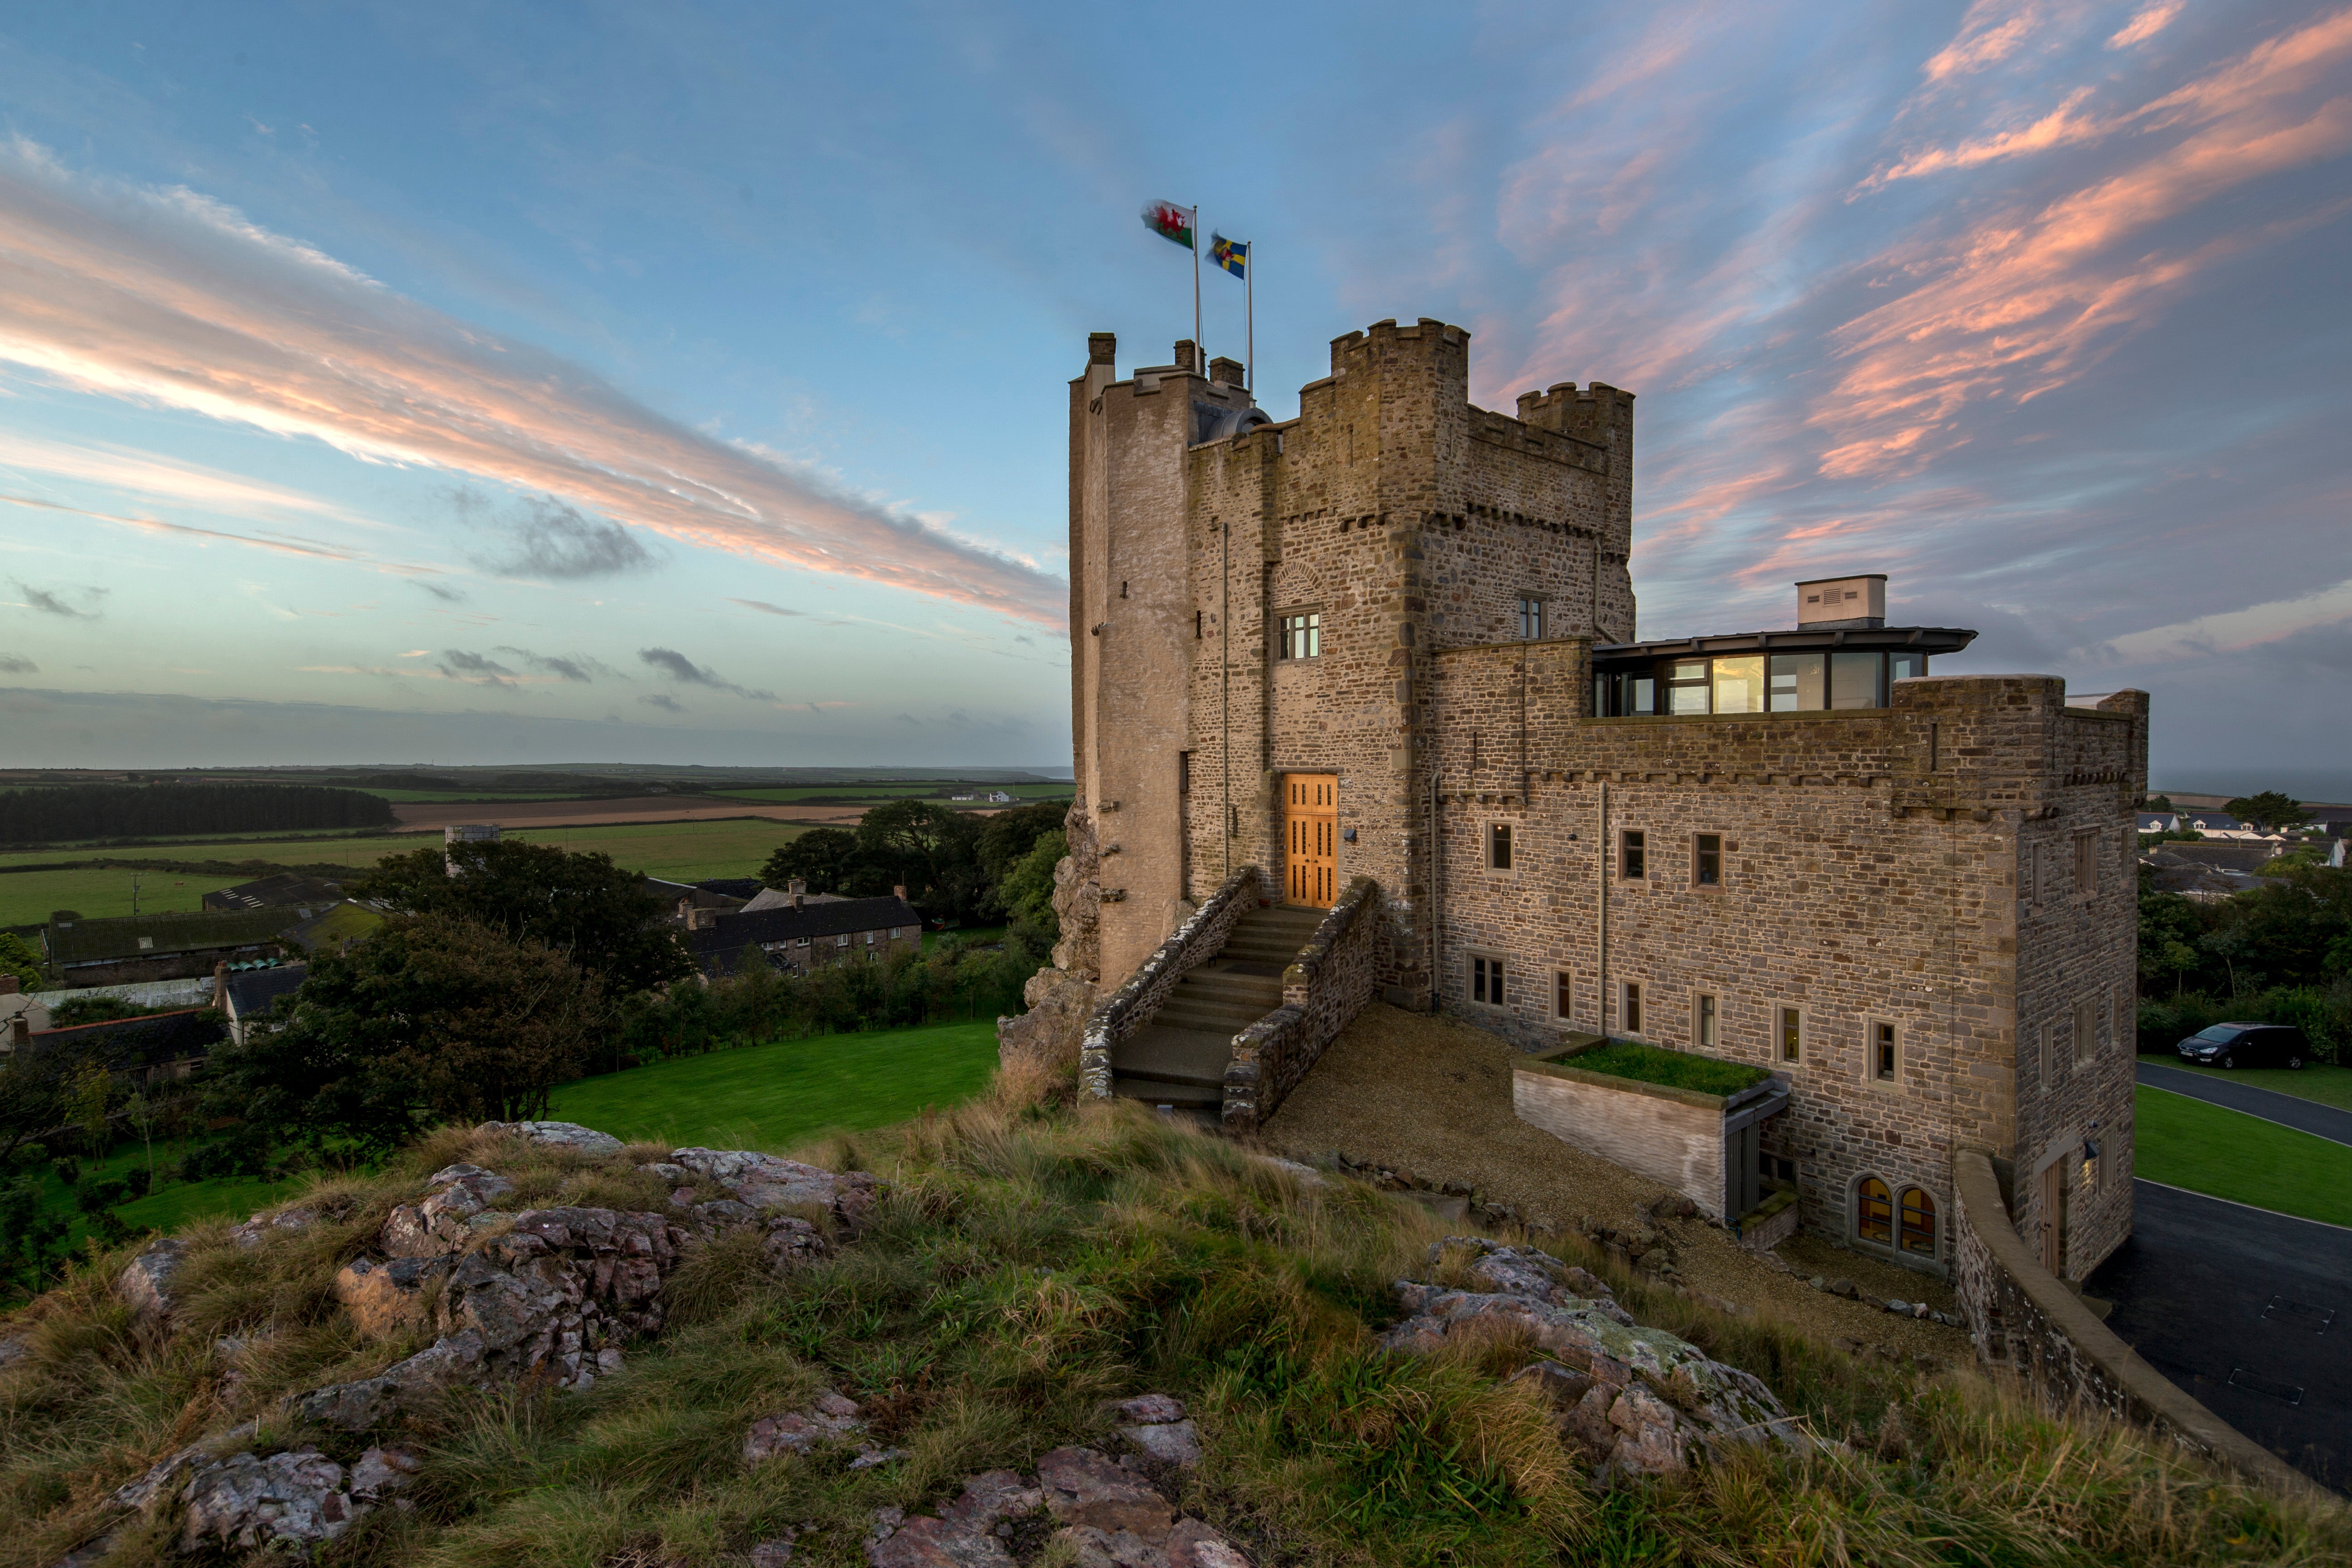 Feel like you’ve stepped into a period drama with a castle stay